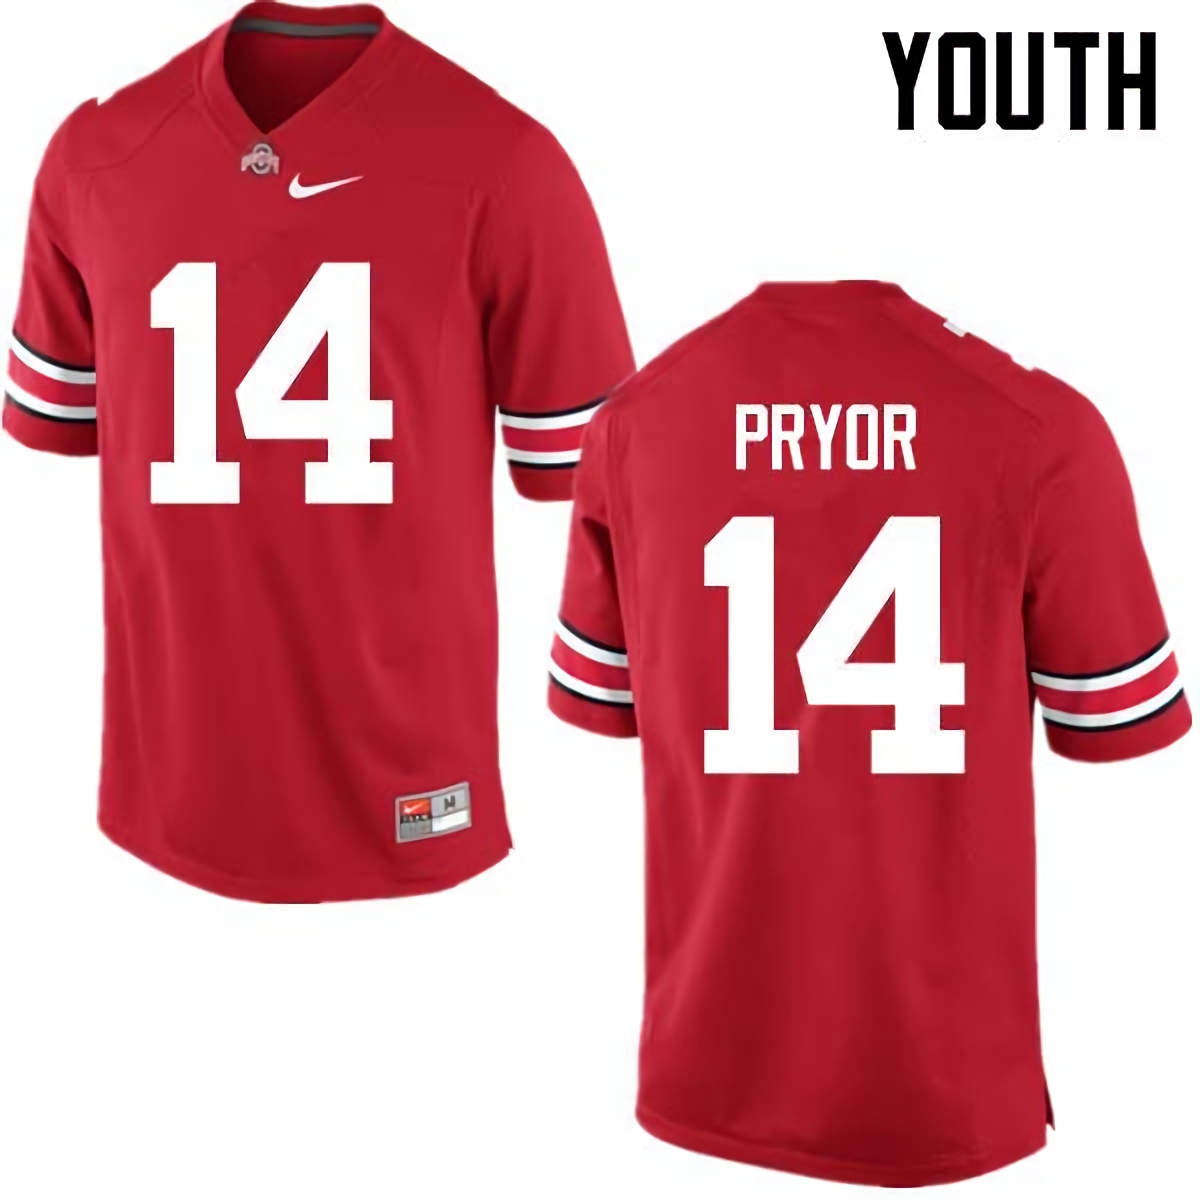 Isaiah Pryor Ohio State Buckeyes Youth NCAA #14 Nike Red College Stitched Football Jersey DLX8356AH